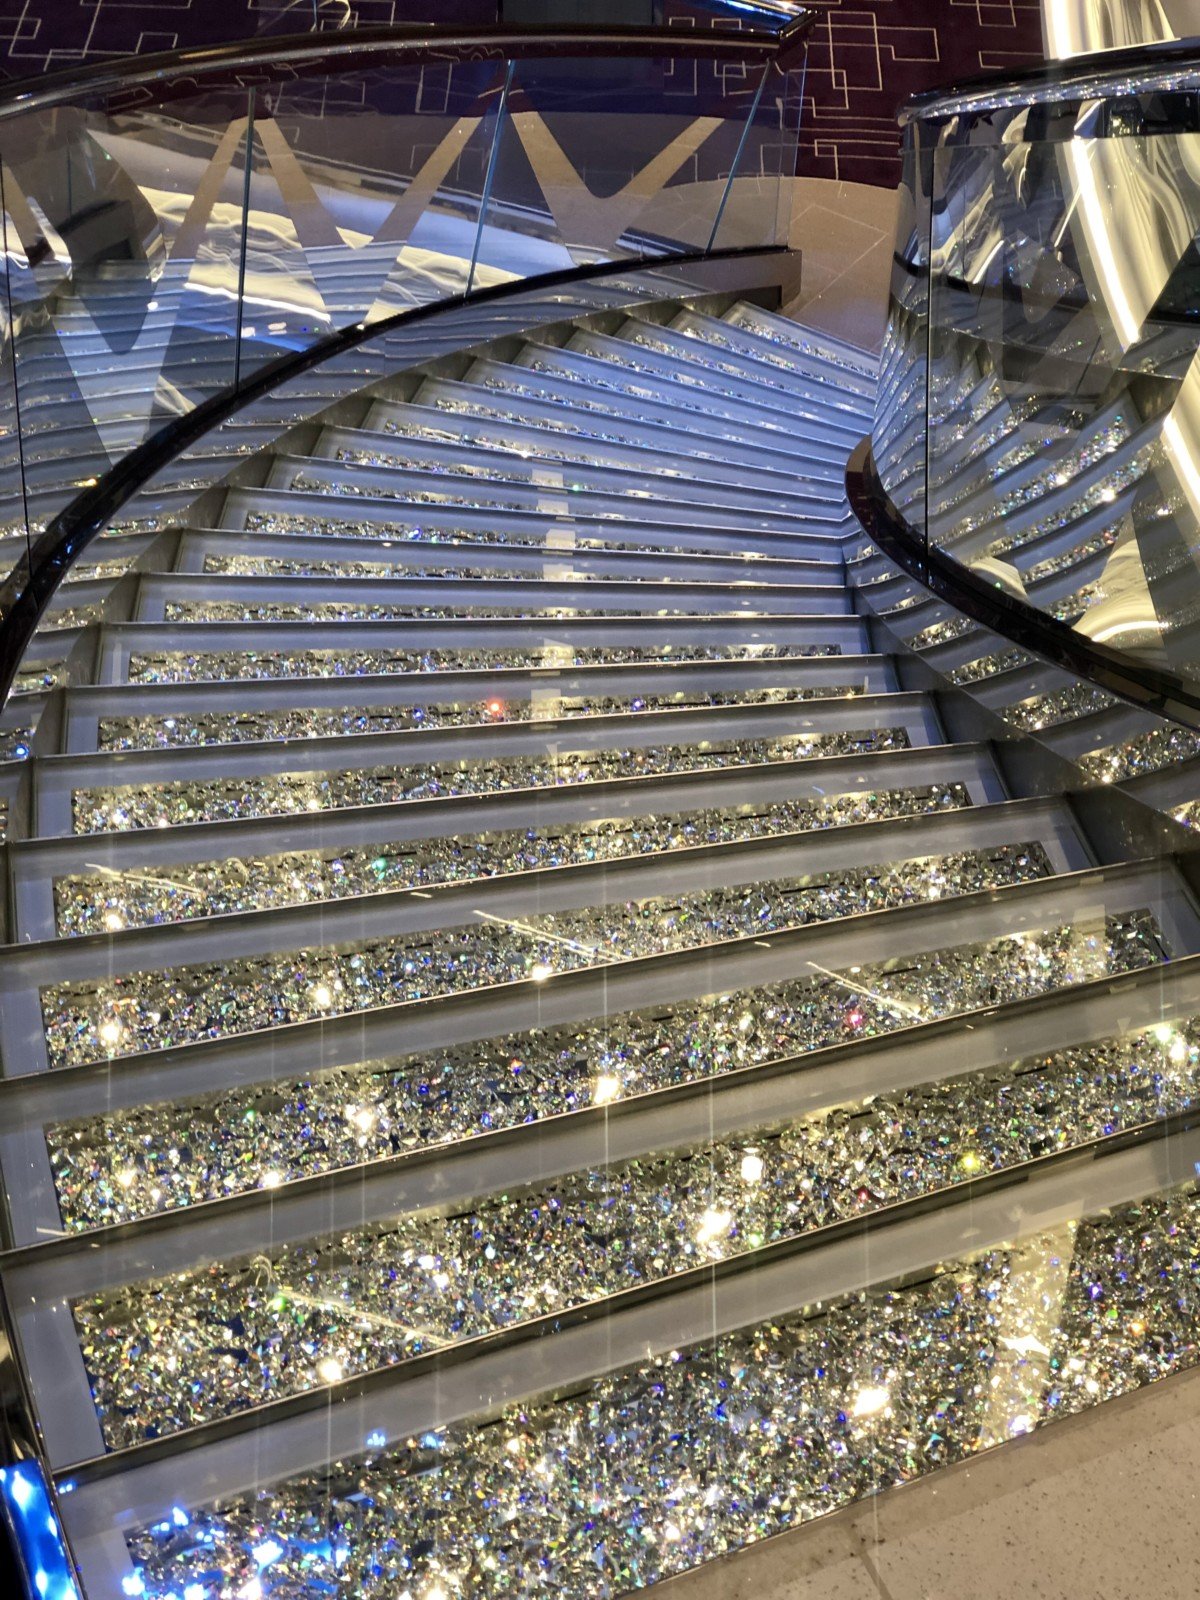 MSC Bellissima Crystal Stair are over £8000 each, these are in the central atrium